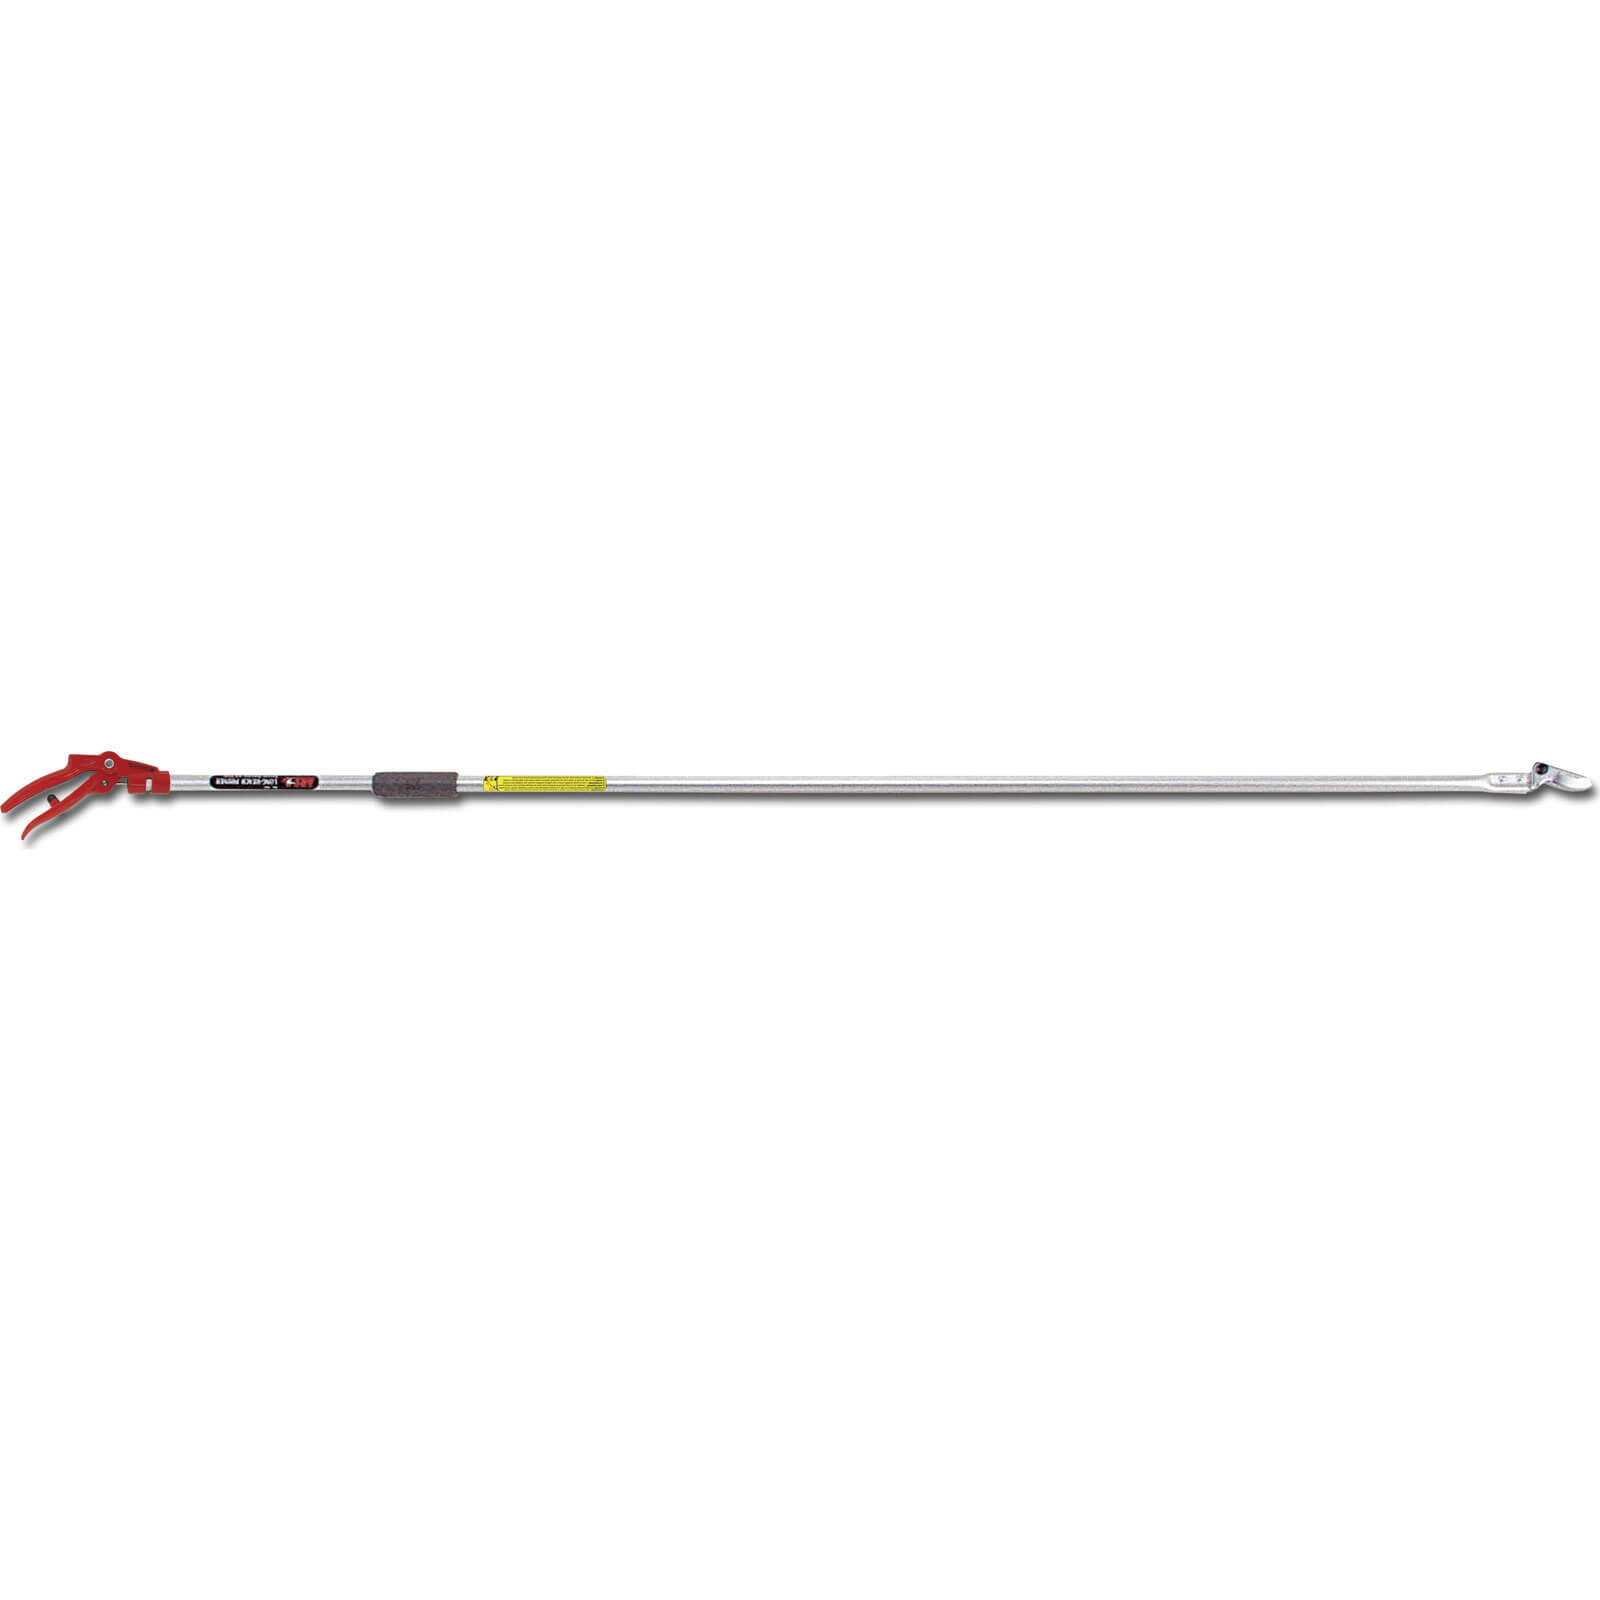 ARS 160 Long Reach Cut and Hold Pruner 1.8m